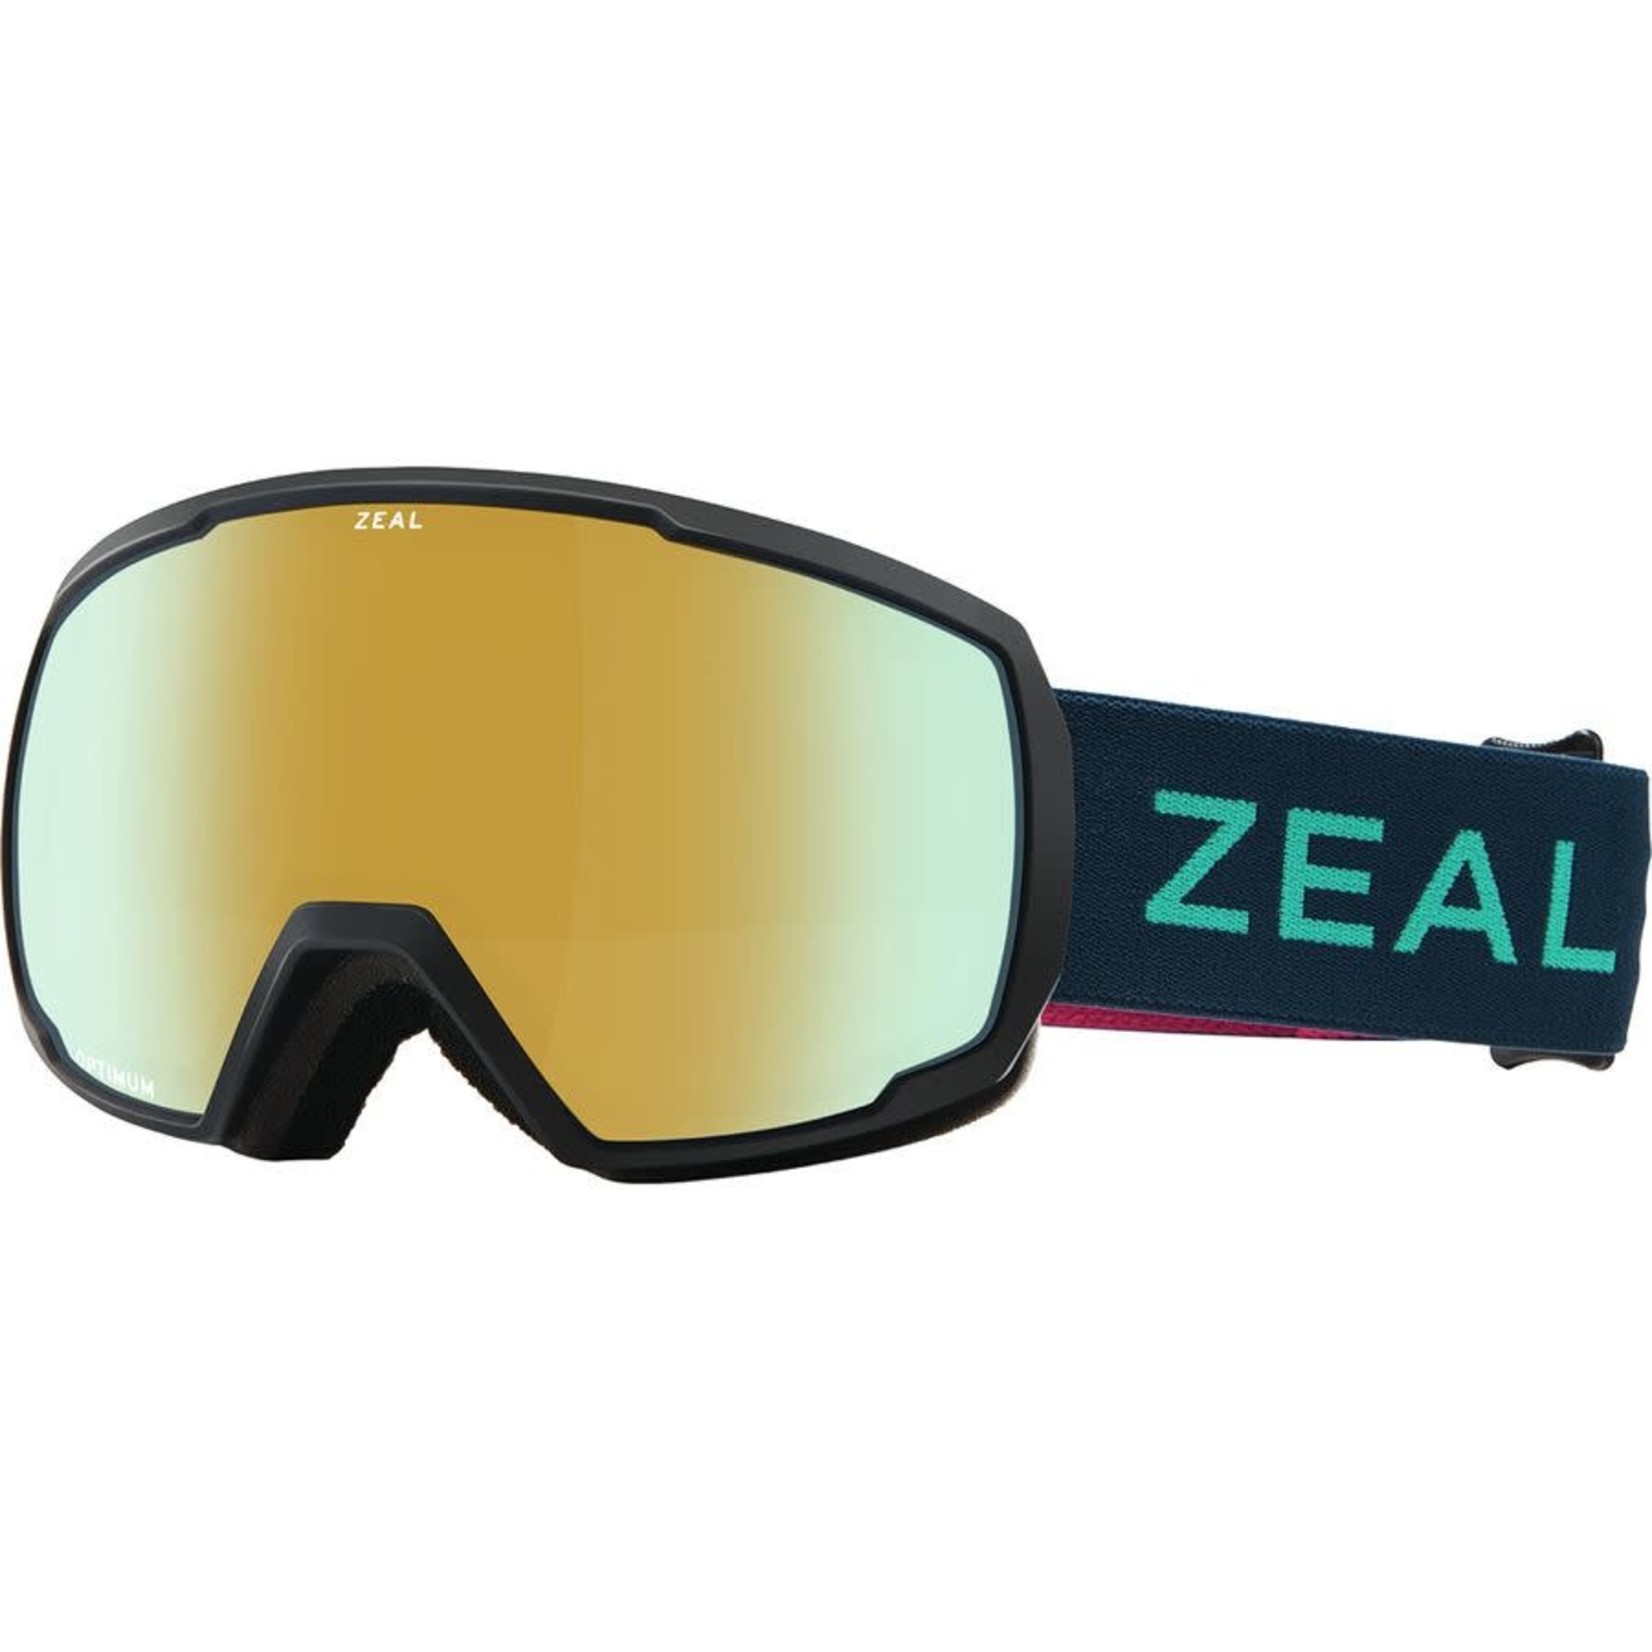 Zeal Zeal Nomad Fruit Punch Goggles 2019 - Alchemy Mirror